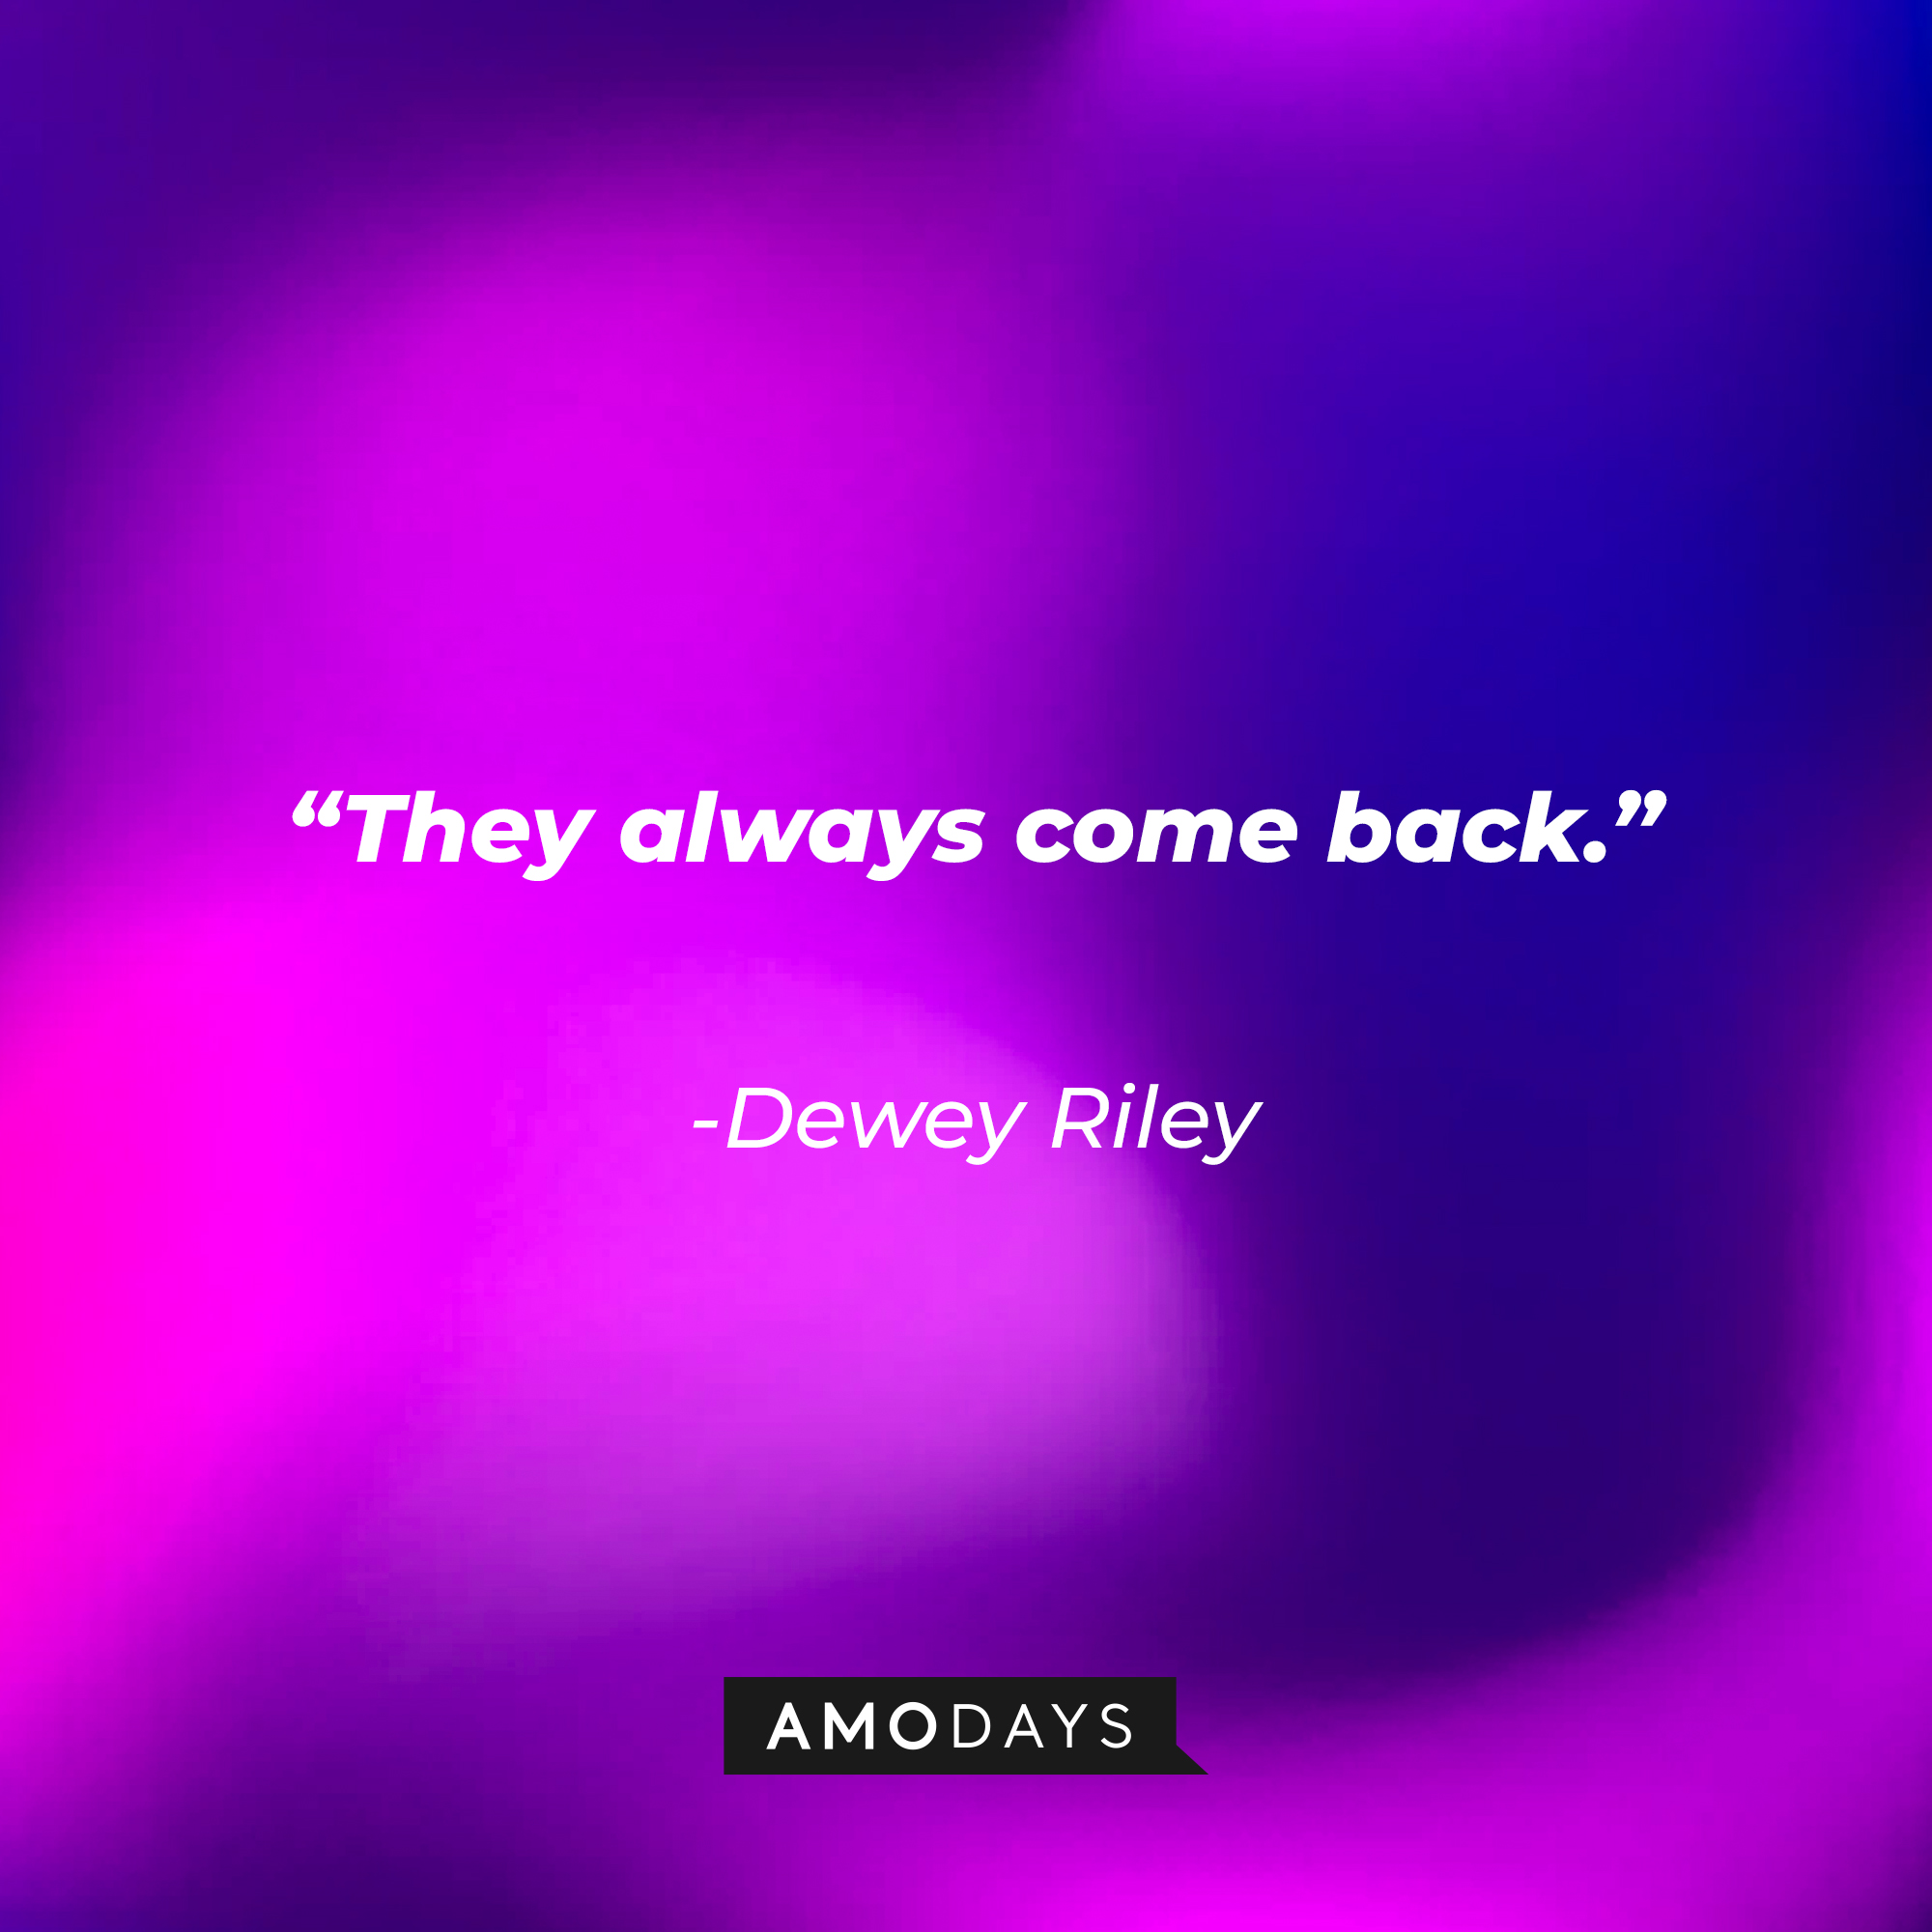 Dewey Riley’s quote from “Scream ‘(2020)’”: "They always come back." | Source: AmoDays